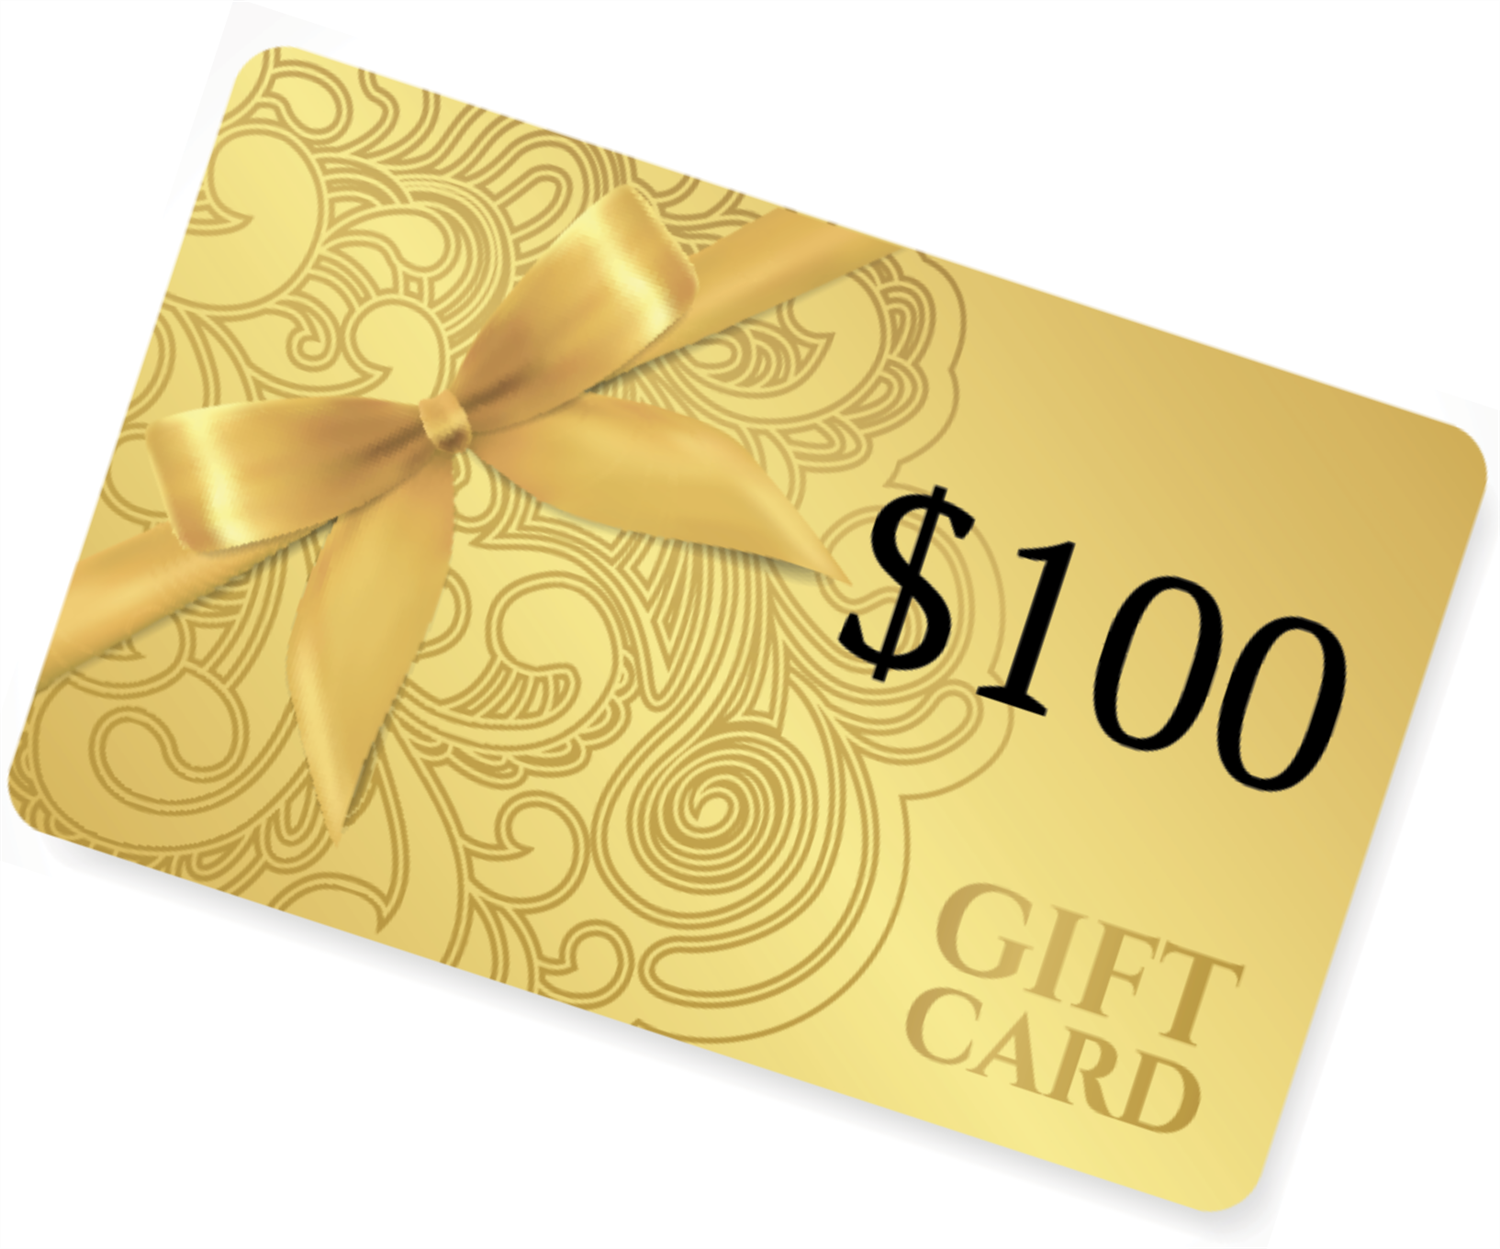 $100 Gift Card Vaccine Incentive